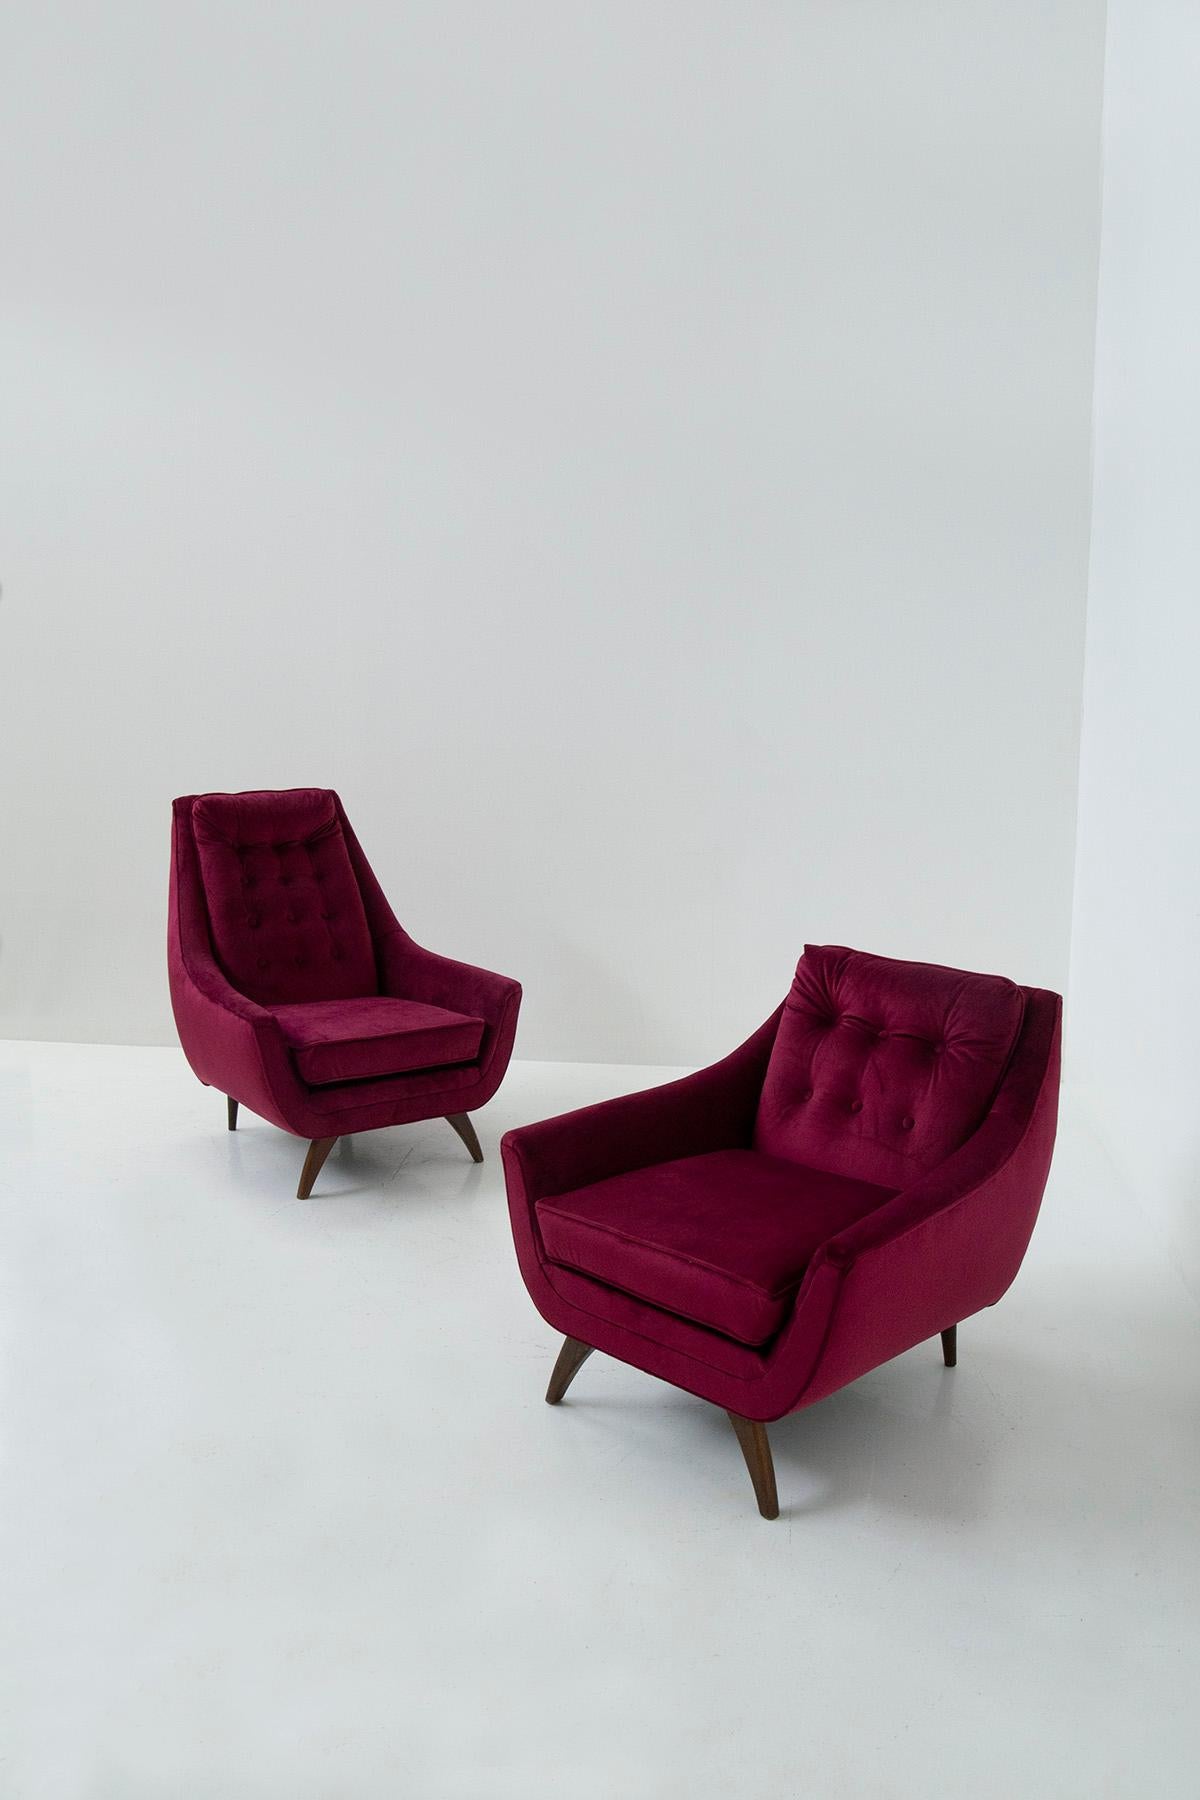 Mid-Century Modern Adrian Pearsall Pair of Purple Armchairs in Velvet Him and Her For Sale